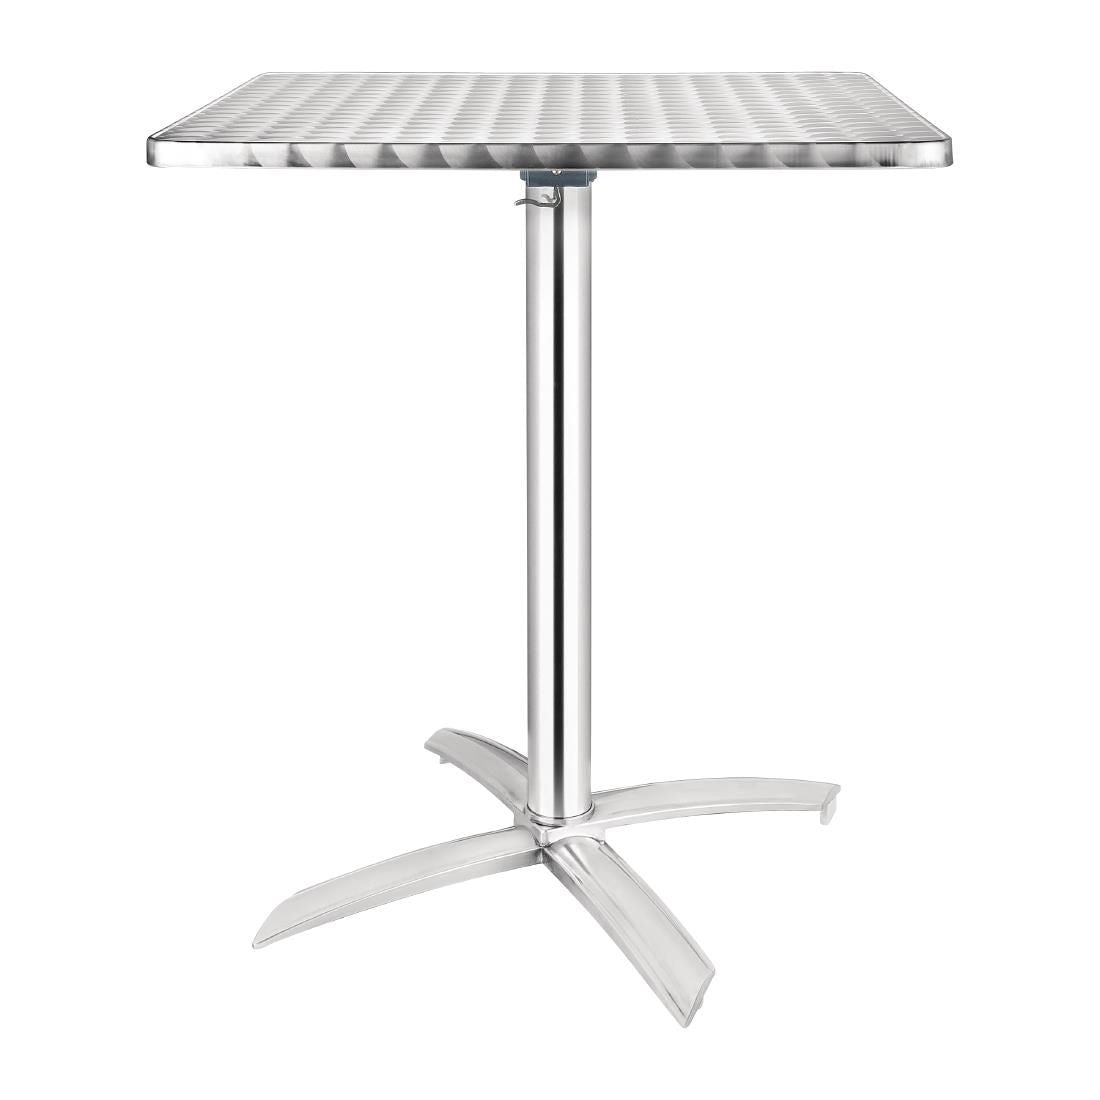 Bolero Square Stainless Steel Flip Top Table 600mm (Single) JD Catering Equipment Solutions Ltd